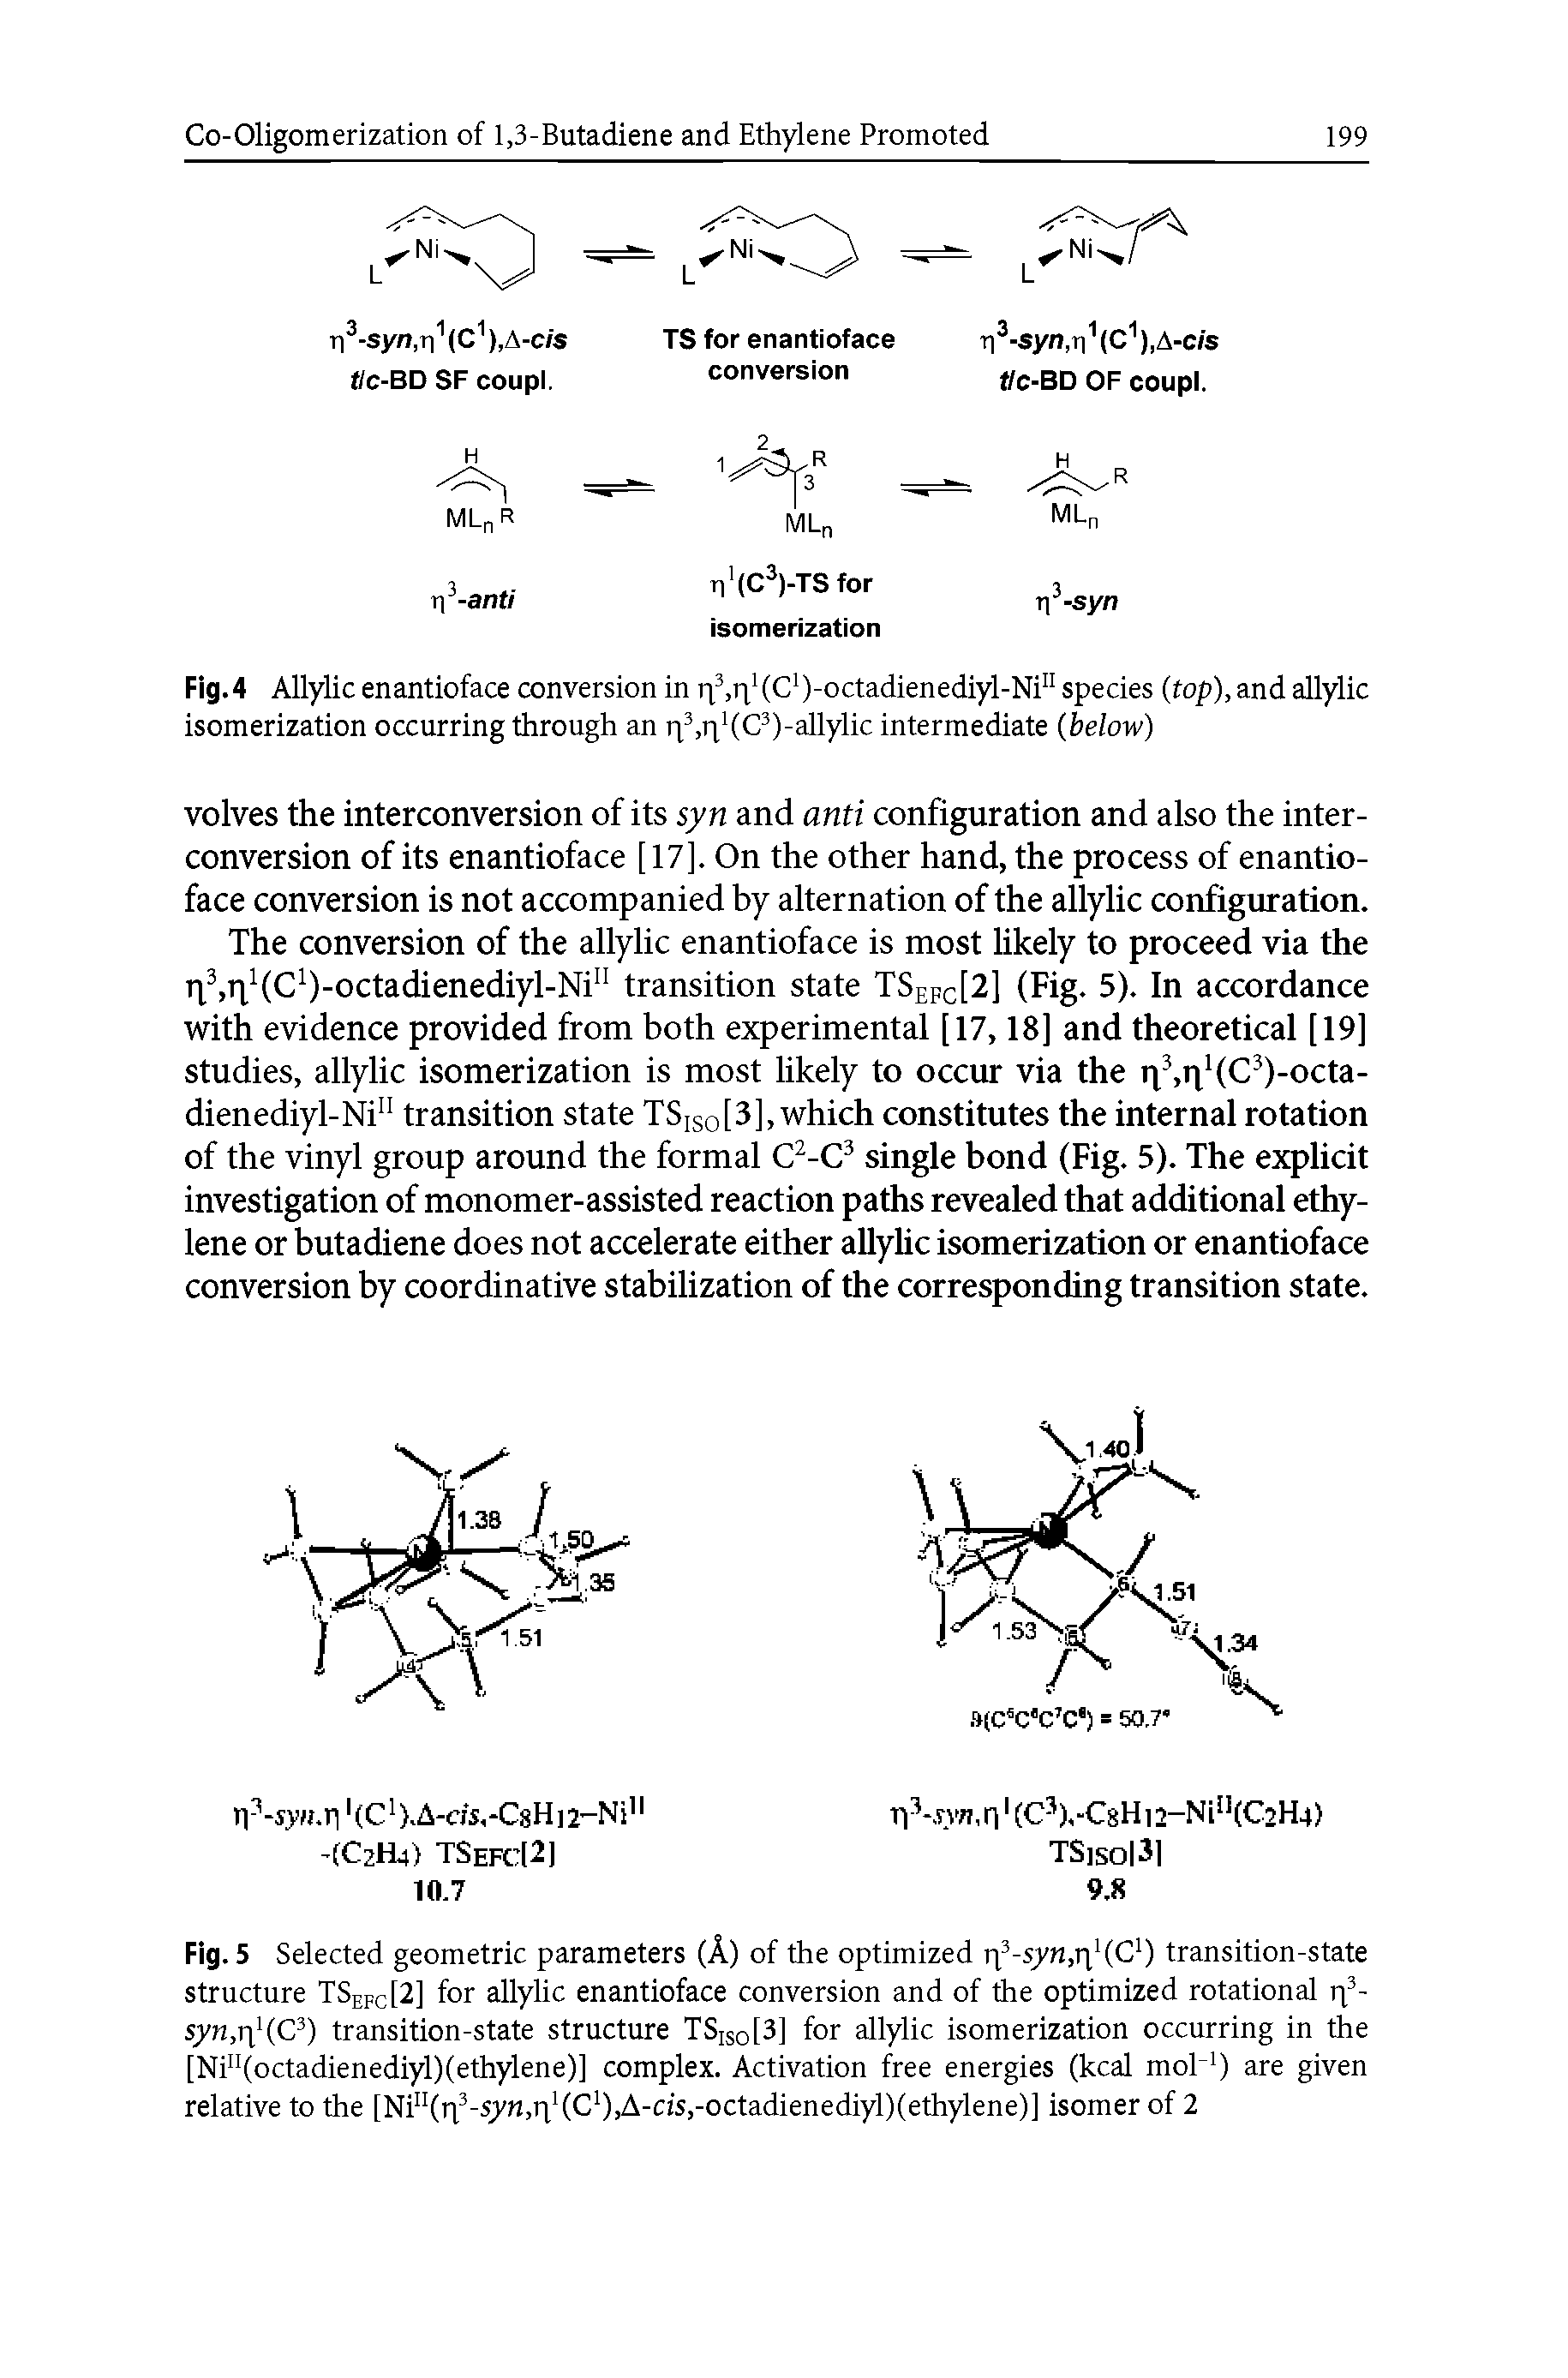 Fig. 5 Selected geometric parameters (A) of the optimized ri -s/n,ri (C ) transition-state structure TSefc[2] for allylic enantioface conversion and of the optimized rotational q -syn,r (C ) transition-state structure TSiso[3] for allylic isomerization occurring in the [Ni (octadienediyl)(ethylene)] complex. Activation free energies (kcal mob ) are given relative to the [Ni"(q -syn,q (C ),A-cis,-octadienediyl)(ethylene)] isomer of 2...